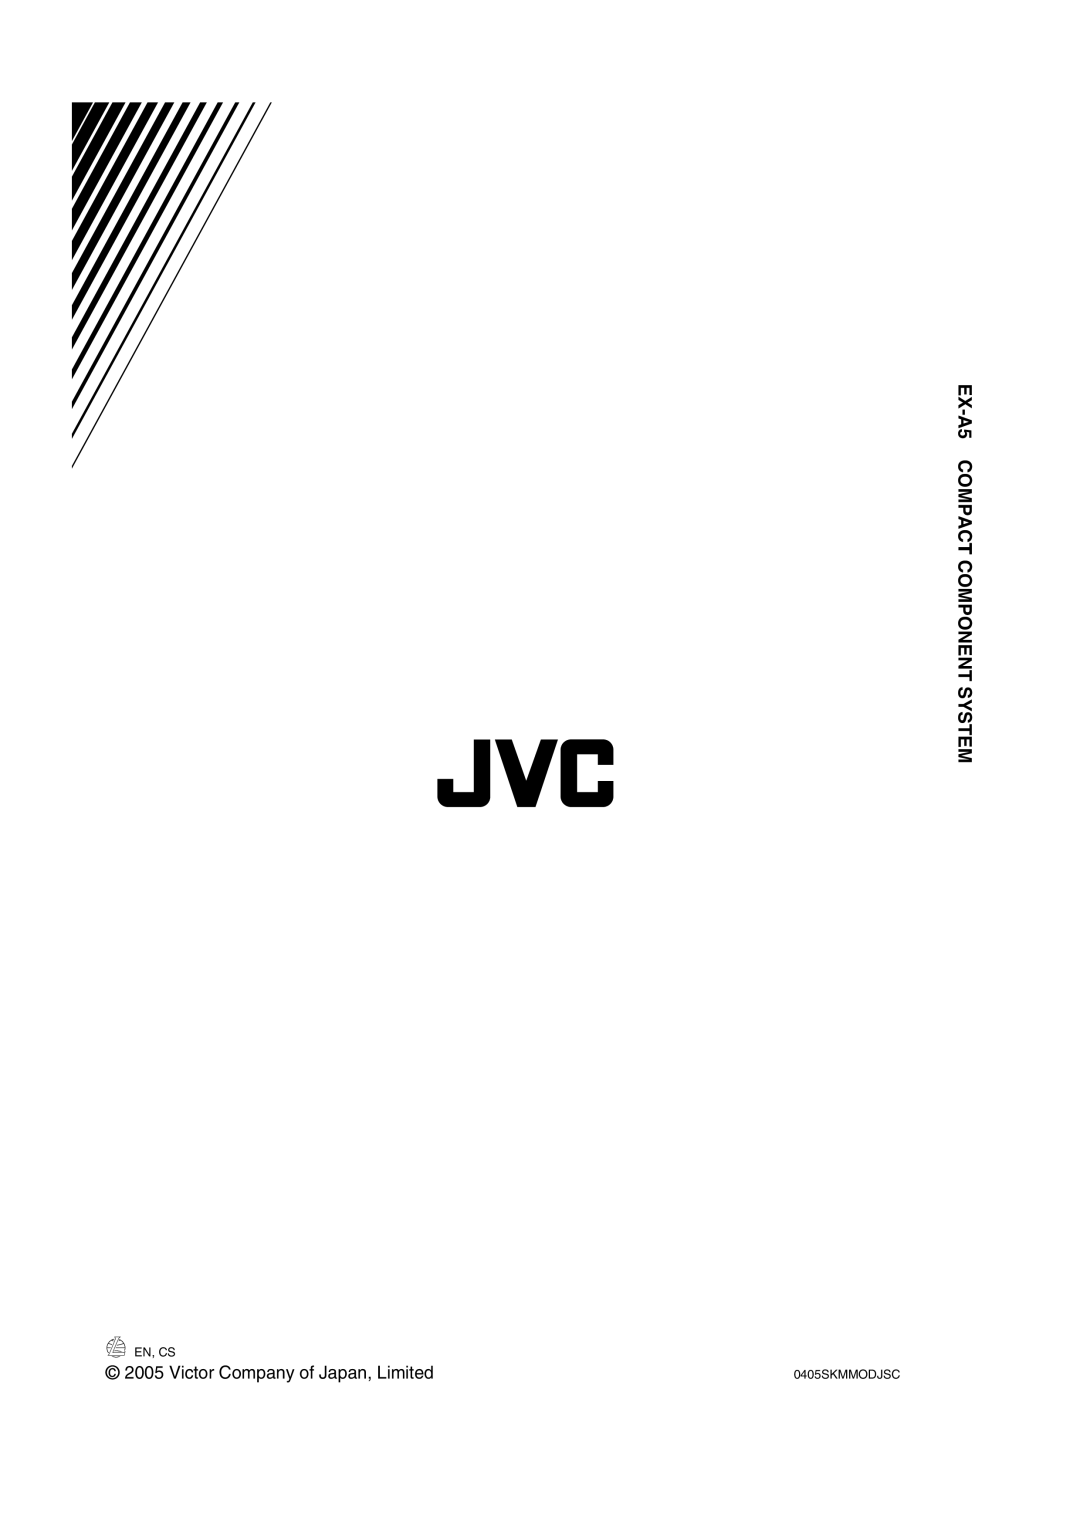 JVC manual EX-A5COMPACT COMPONENT SYSTEM, c 2005 Victor Company of Japan, Limited 